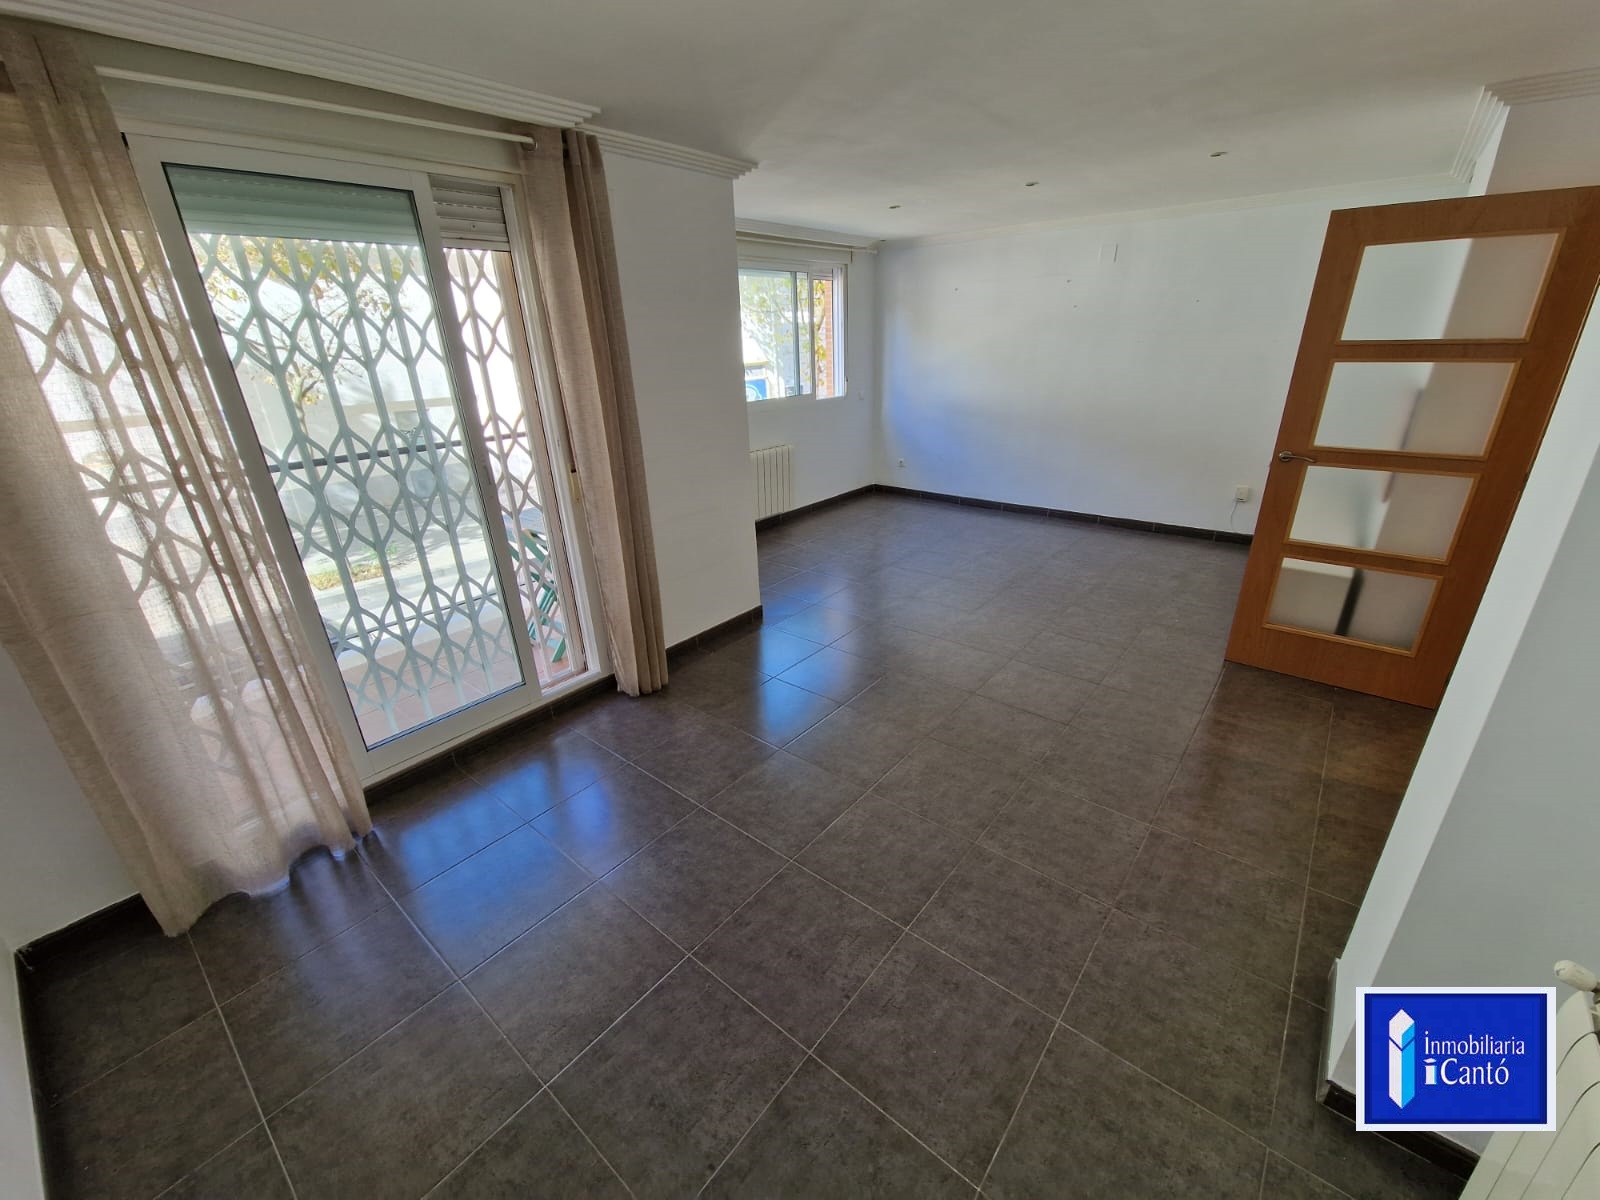 Apartment for sale in the area of Santa Rosa of Alcoy